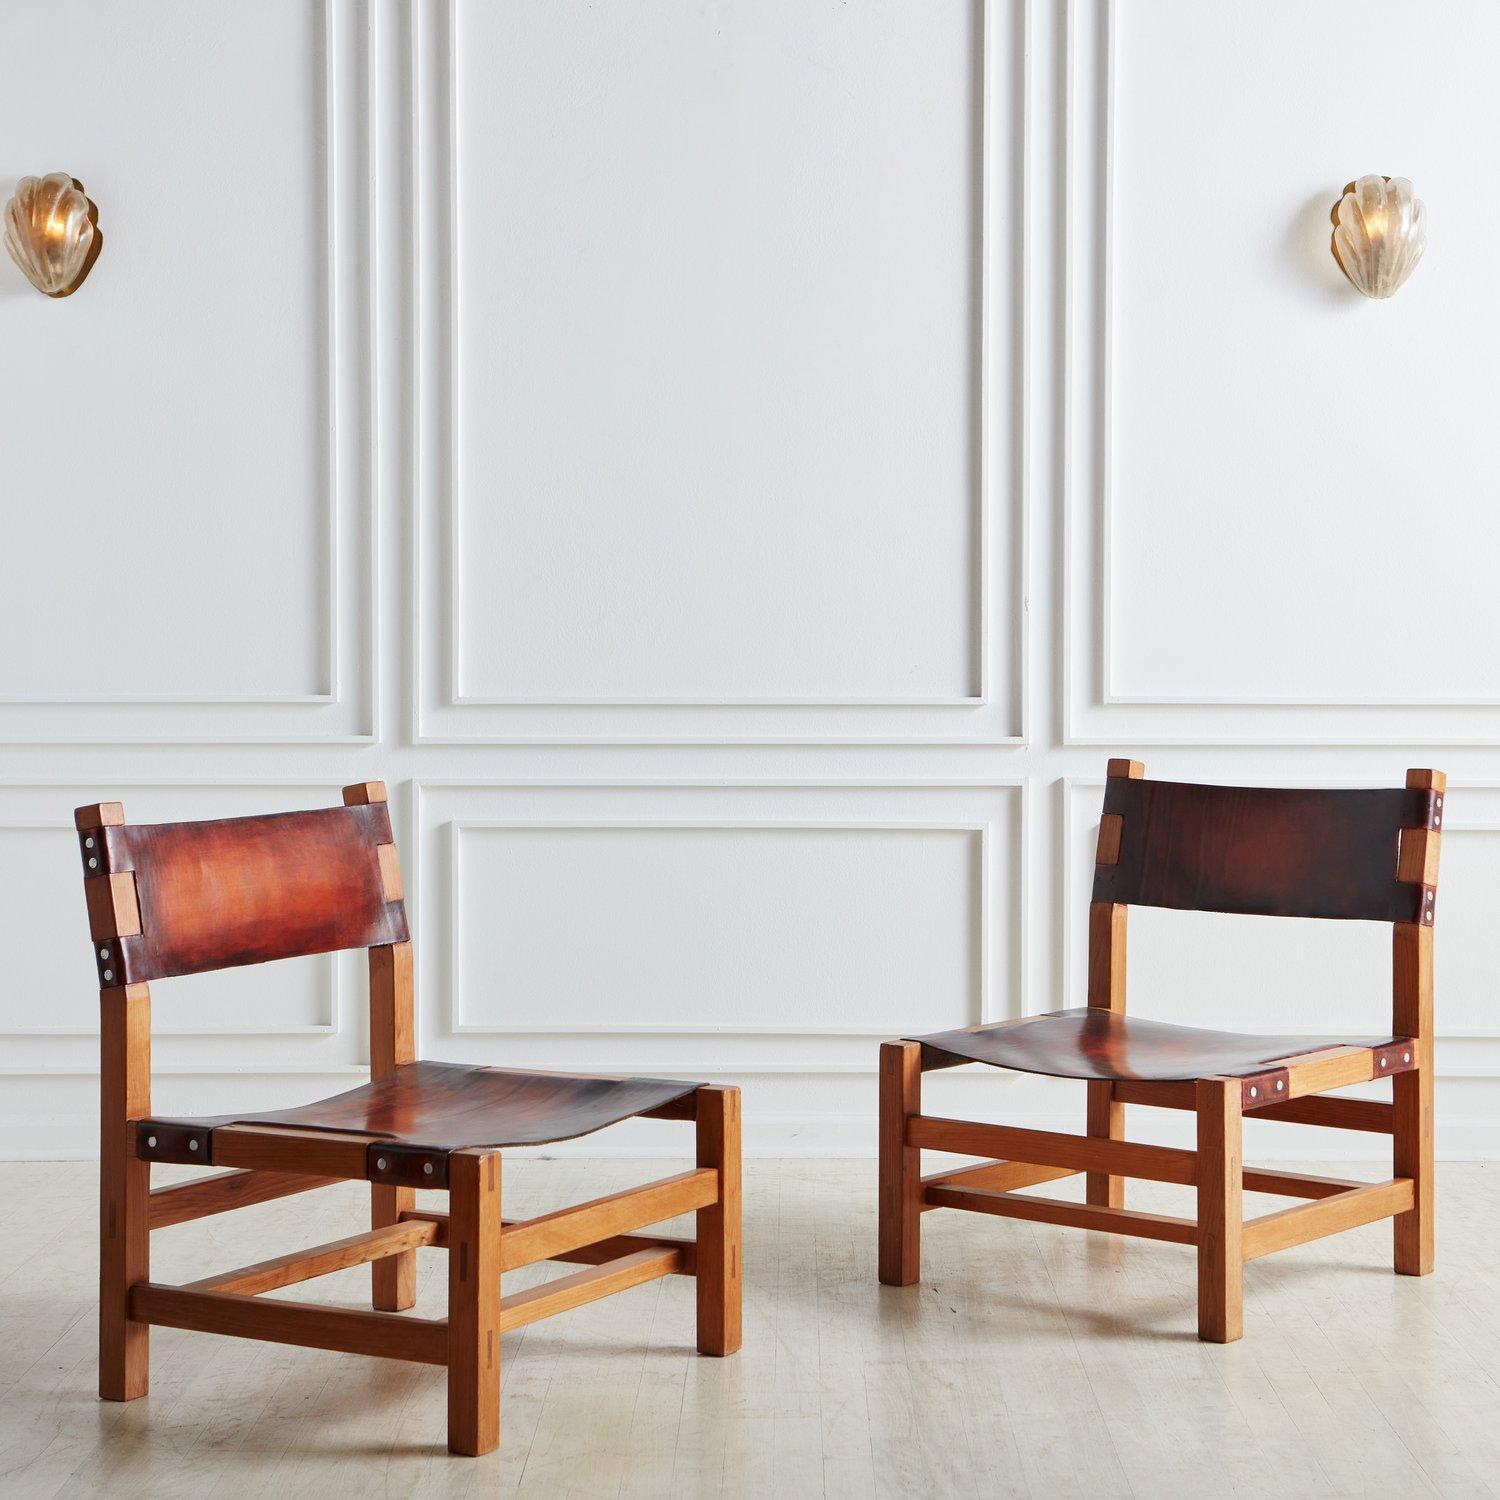 A pair of French fireside lounge chairs attributed to Maison Regain. These chairs have elm wood frames beautifully constructed with wood joinery and feature strikingly patinated leather seats and backs. We love the sleek lines and stately profile on